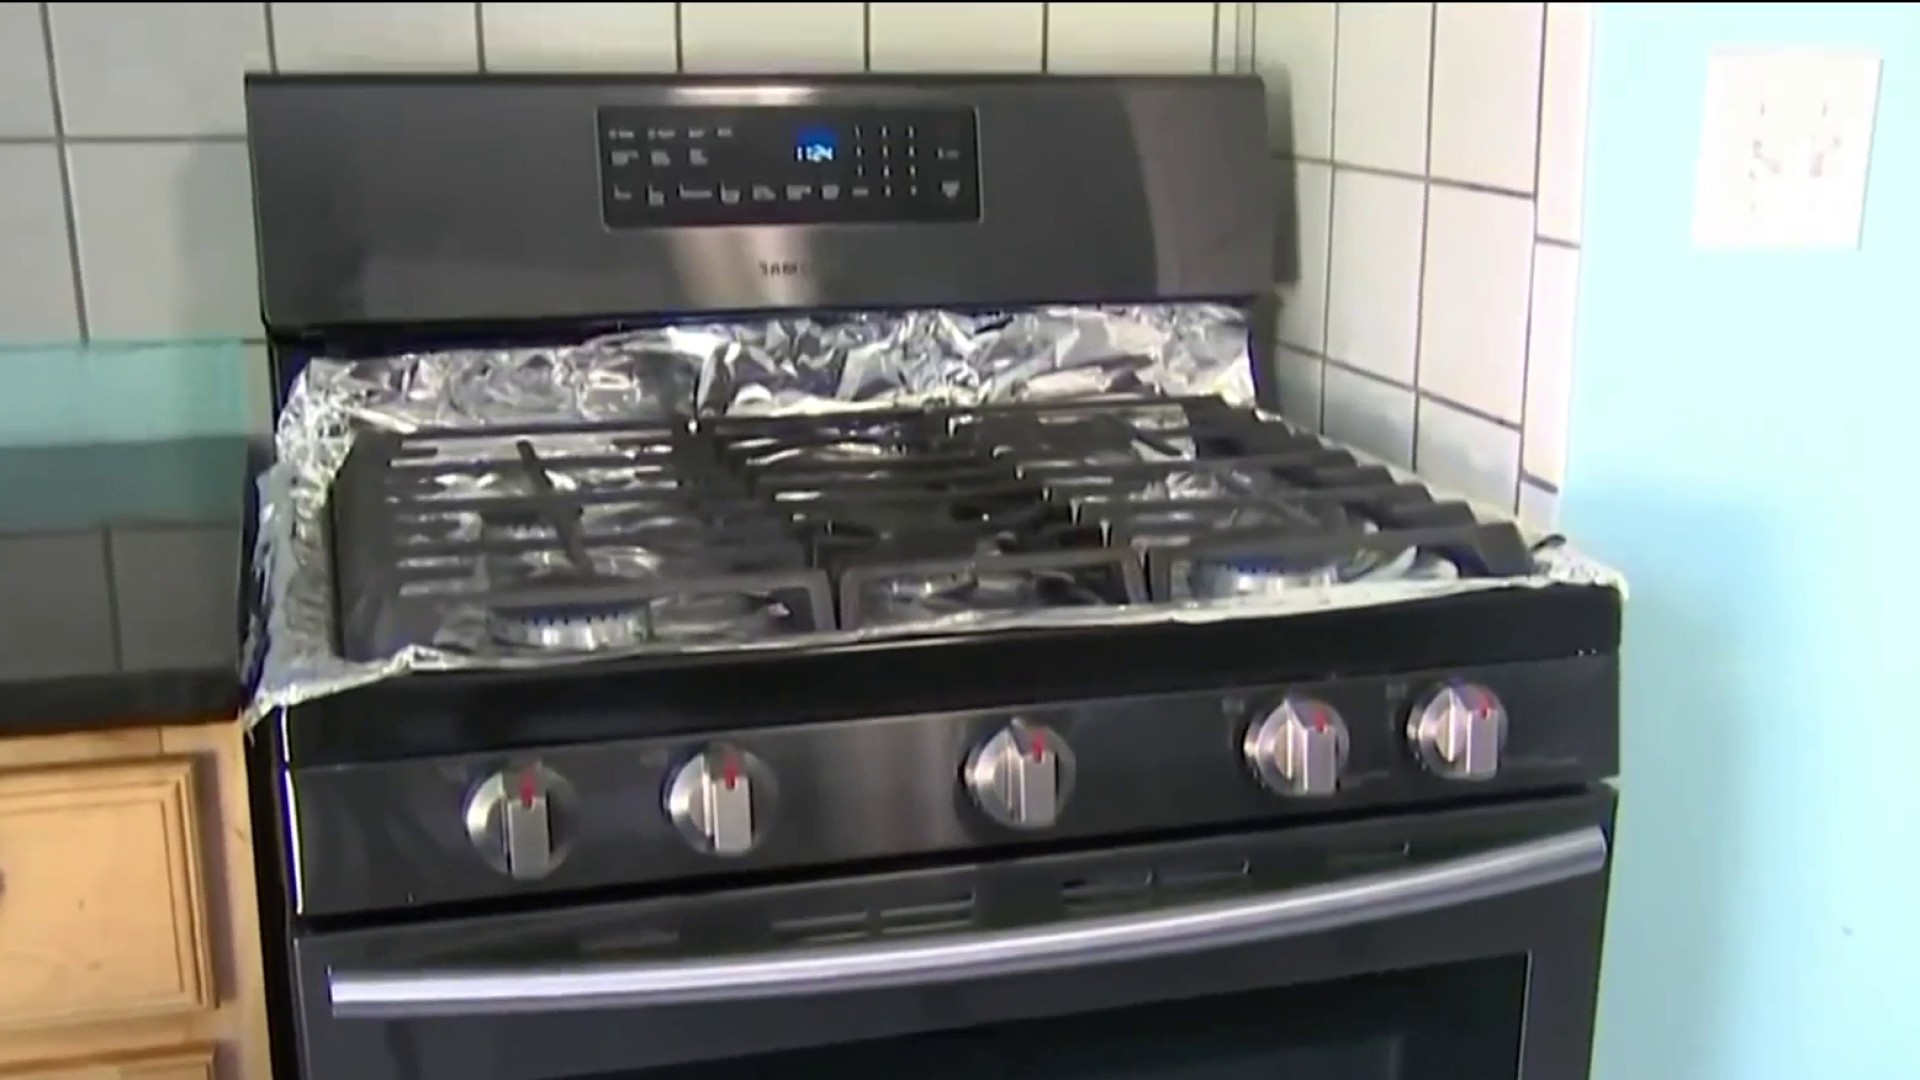 Gas vs. electric stove debate simmers on, but local chefs prefer cooking  with gas 